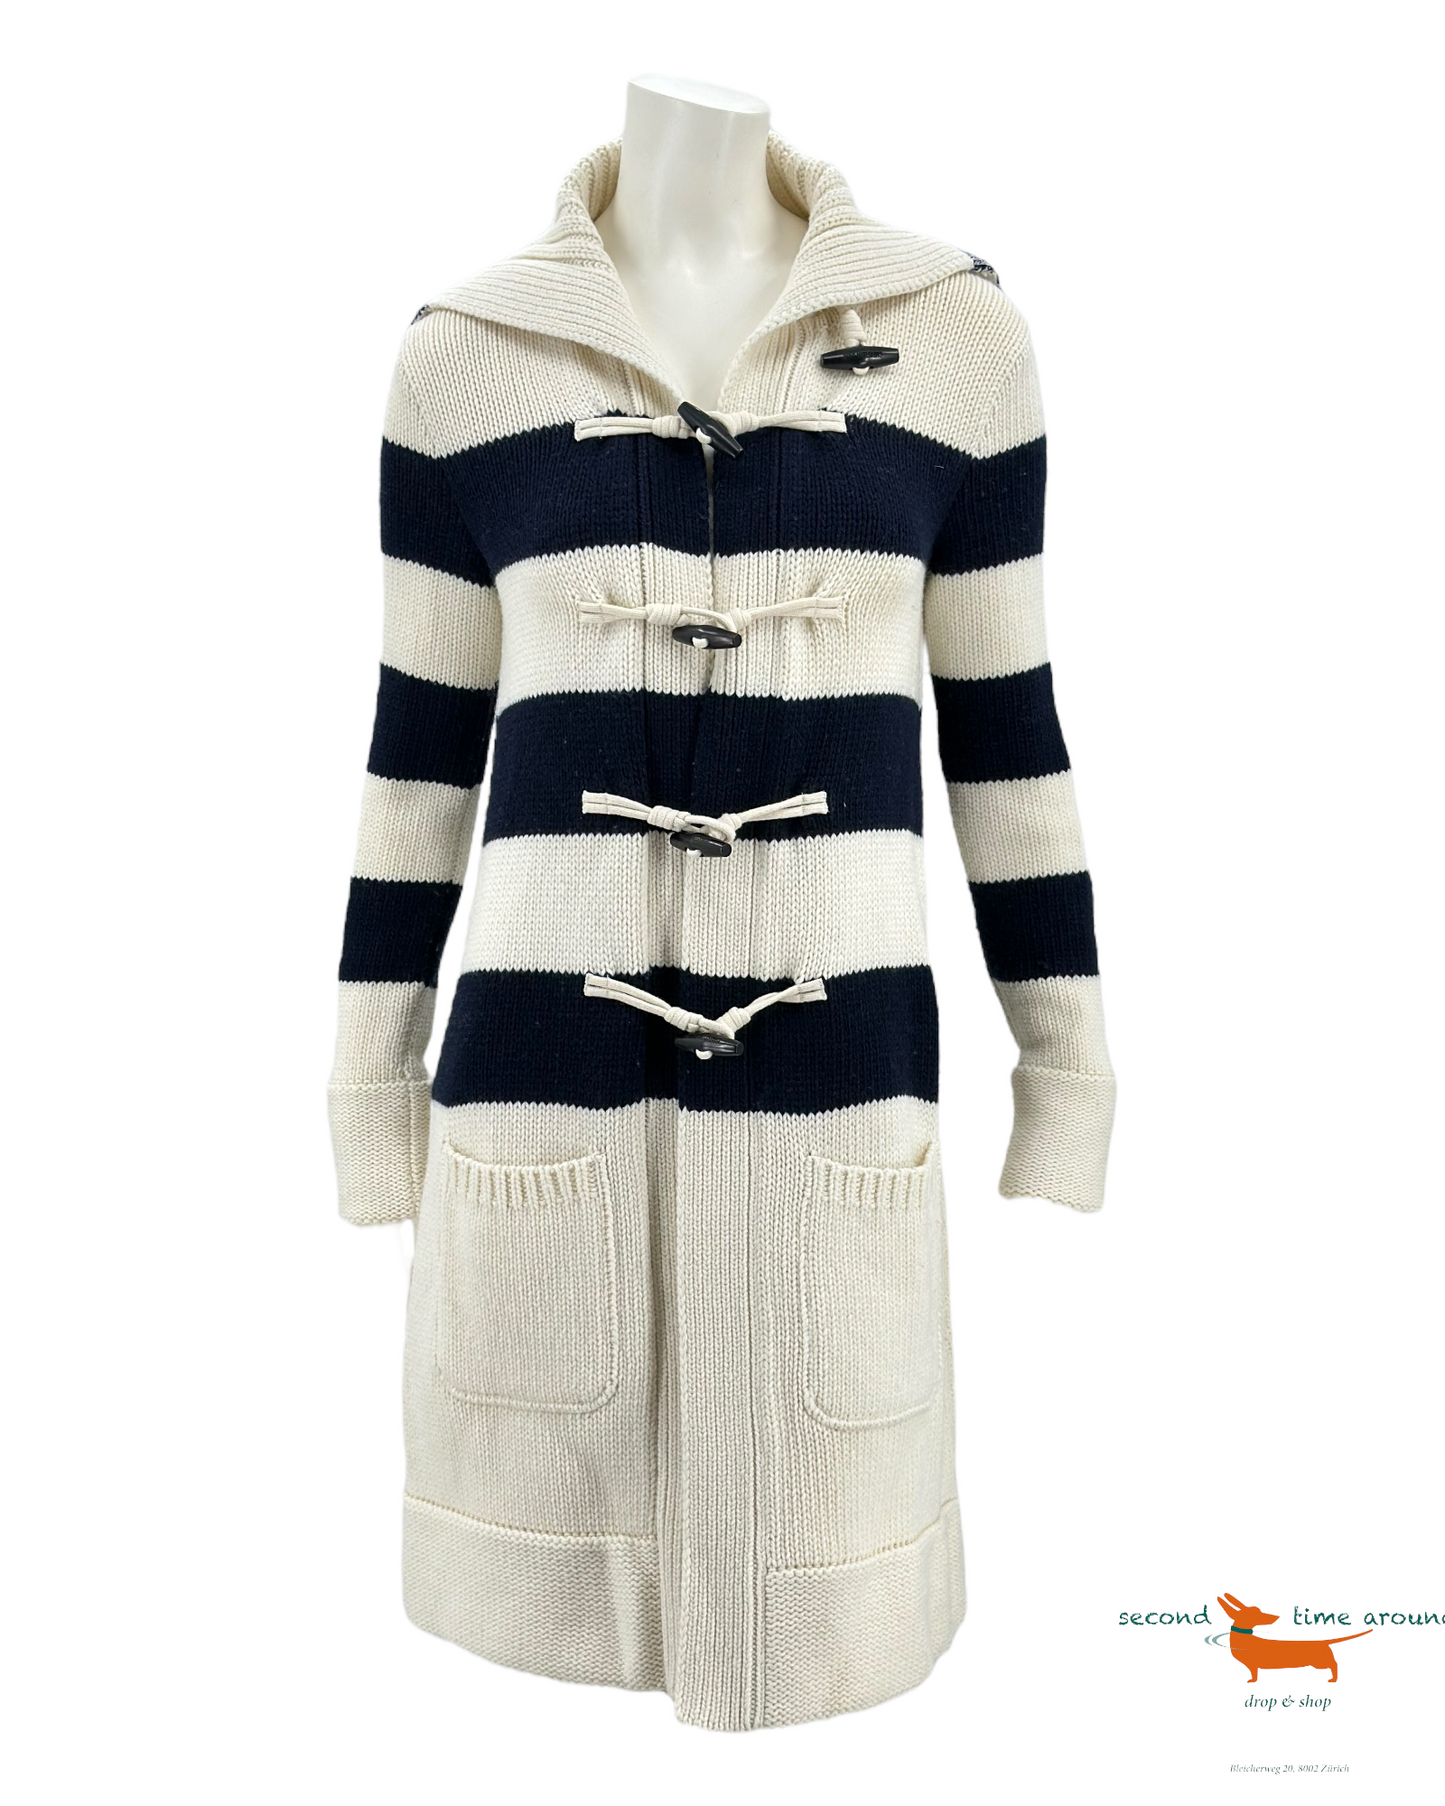 Christian Dior Knitted Coat